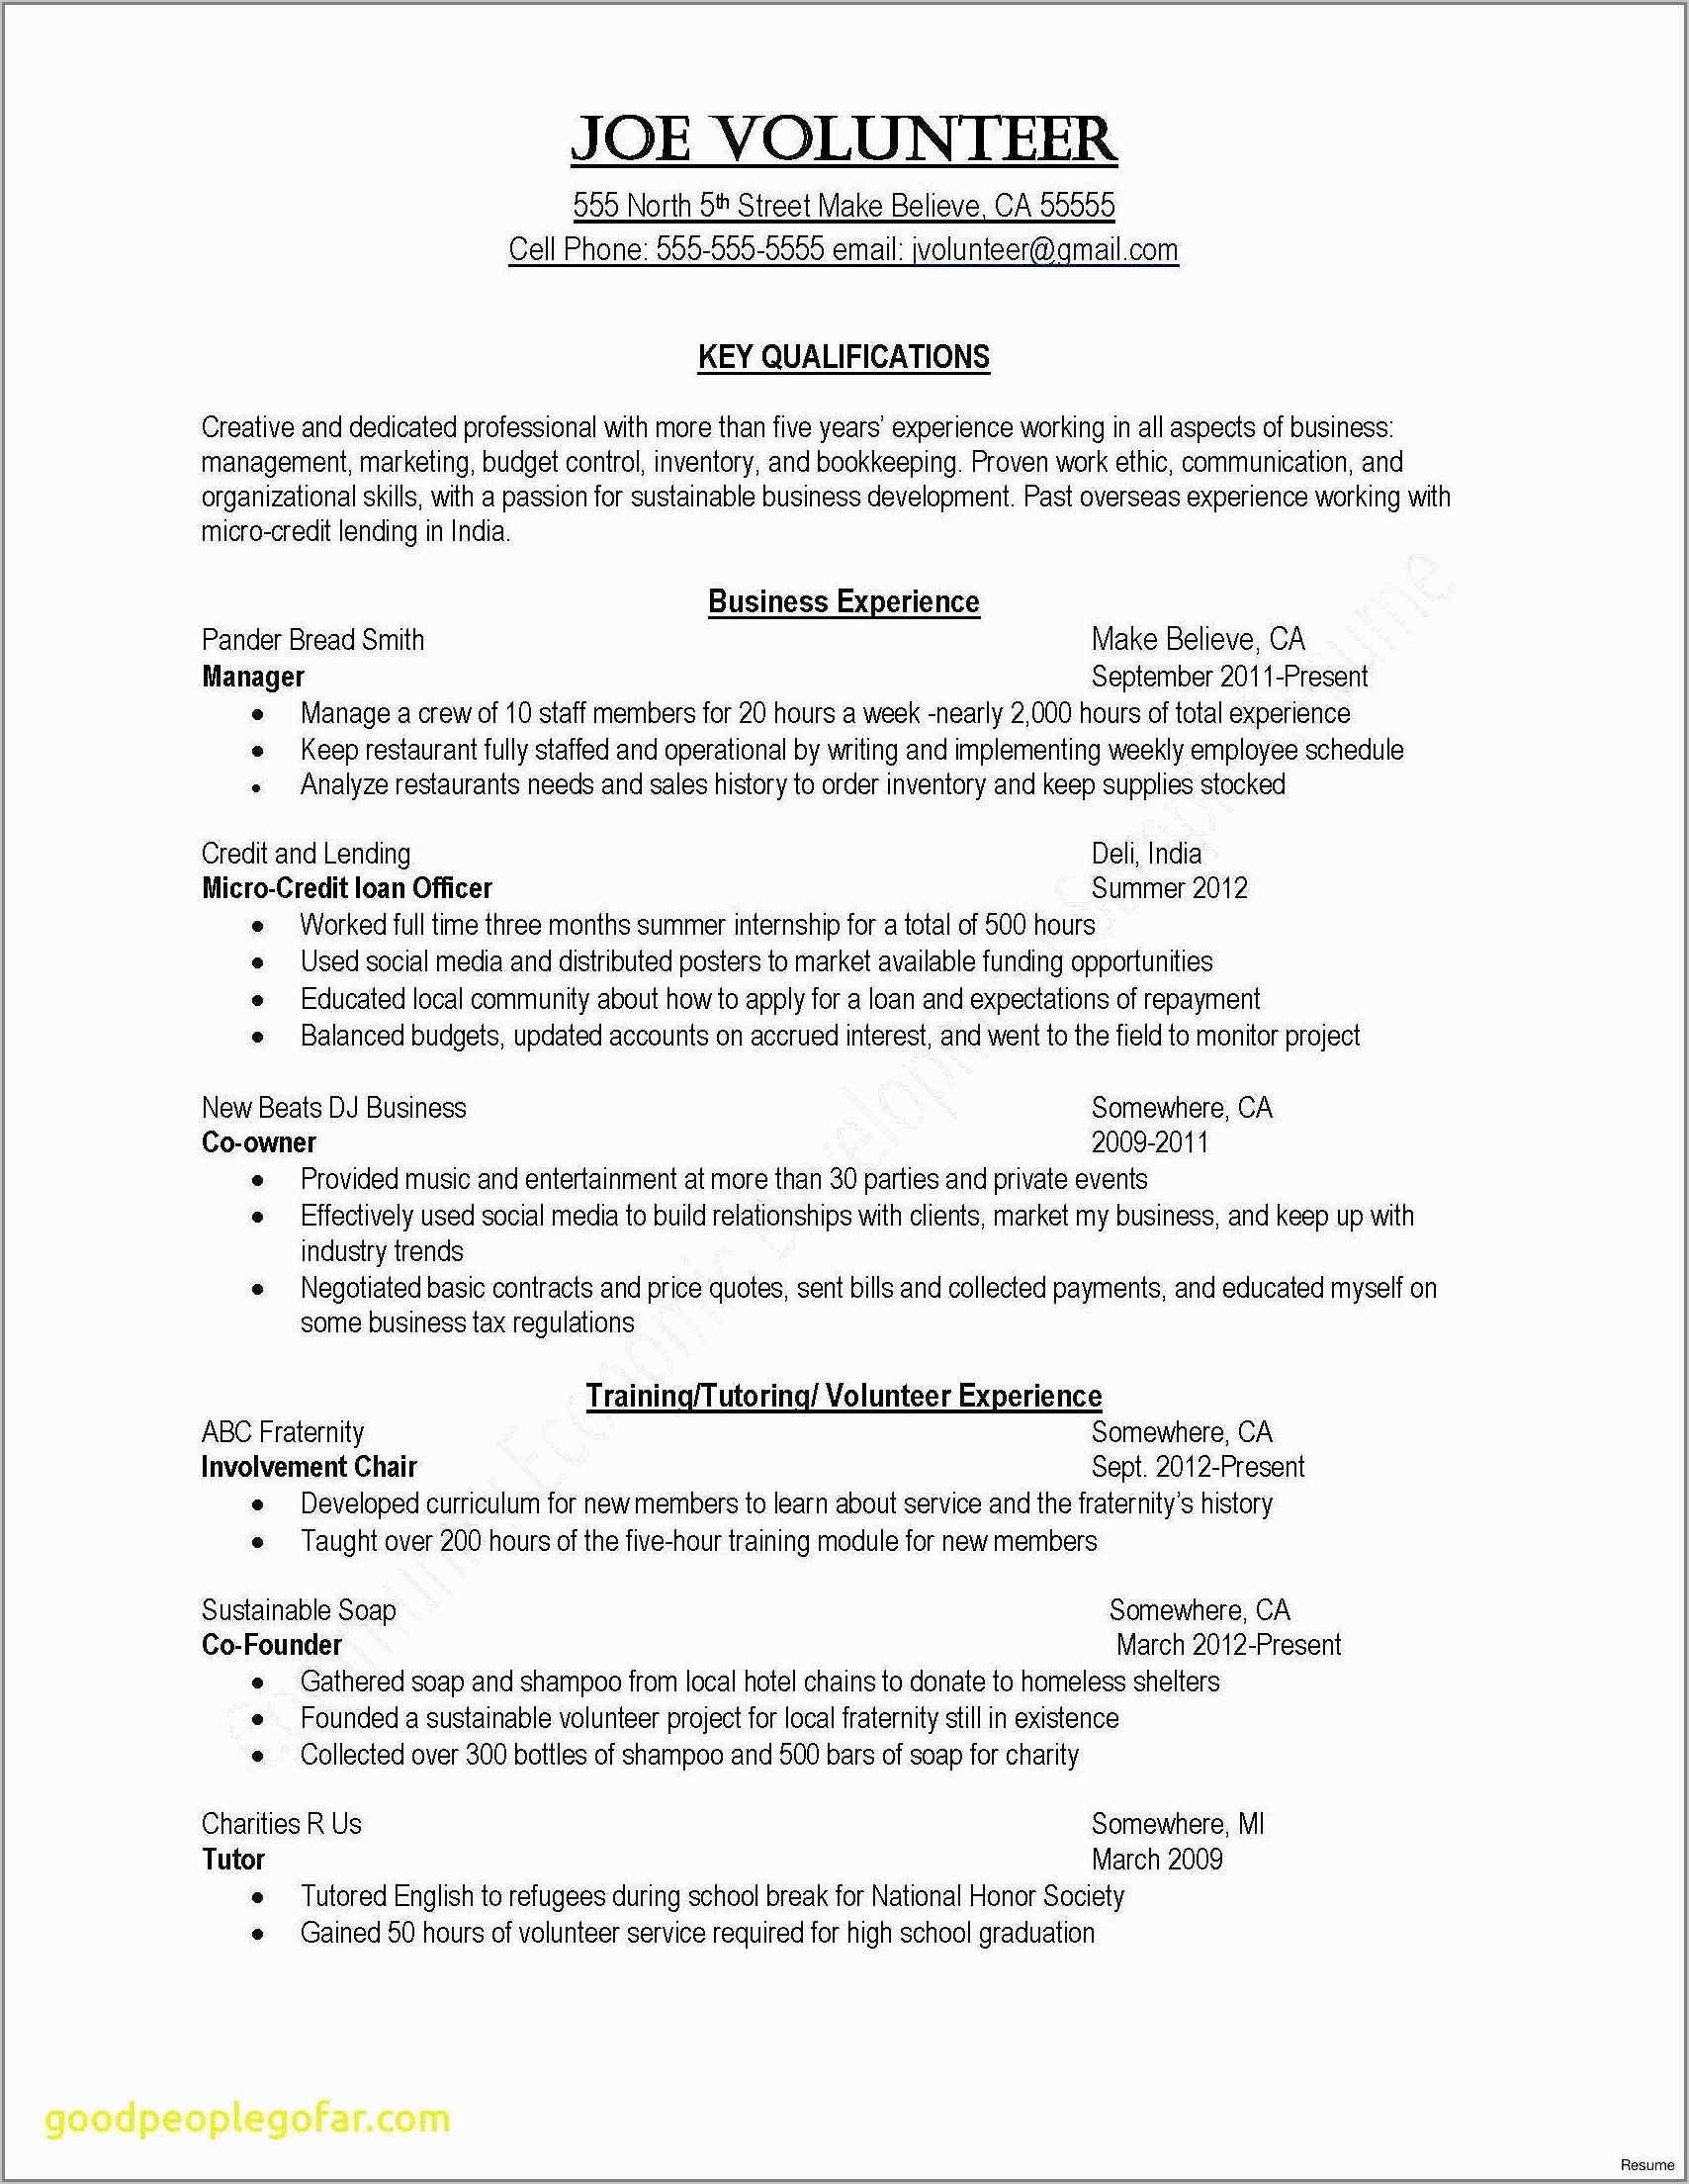 Resume For Sales Executive In India